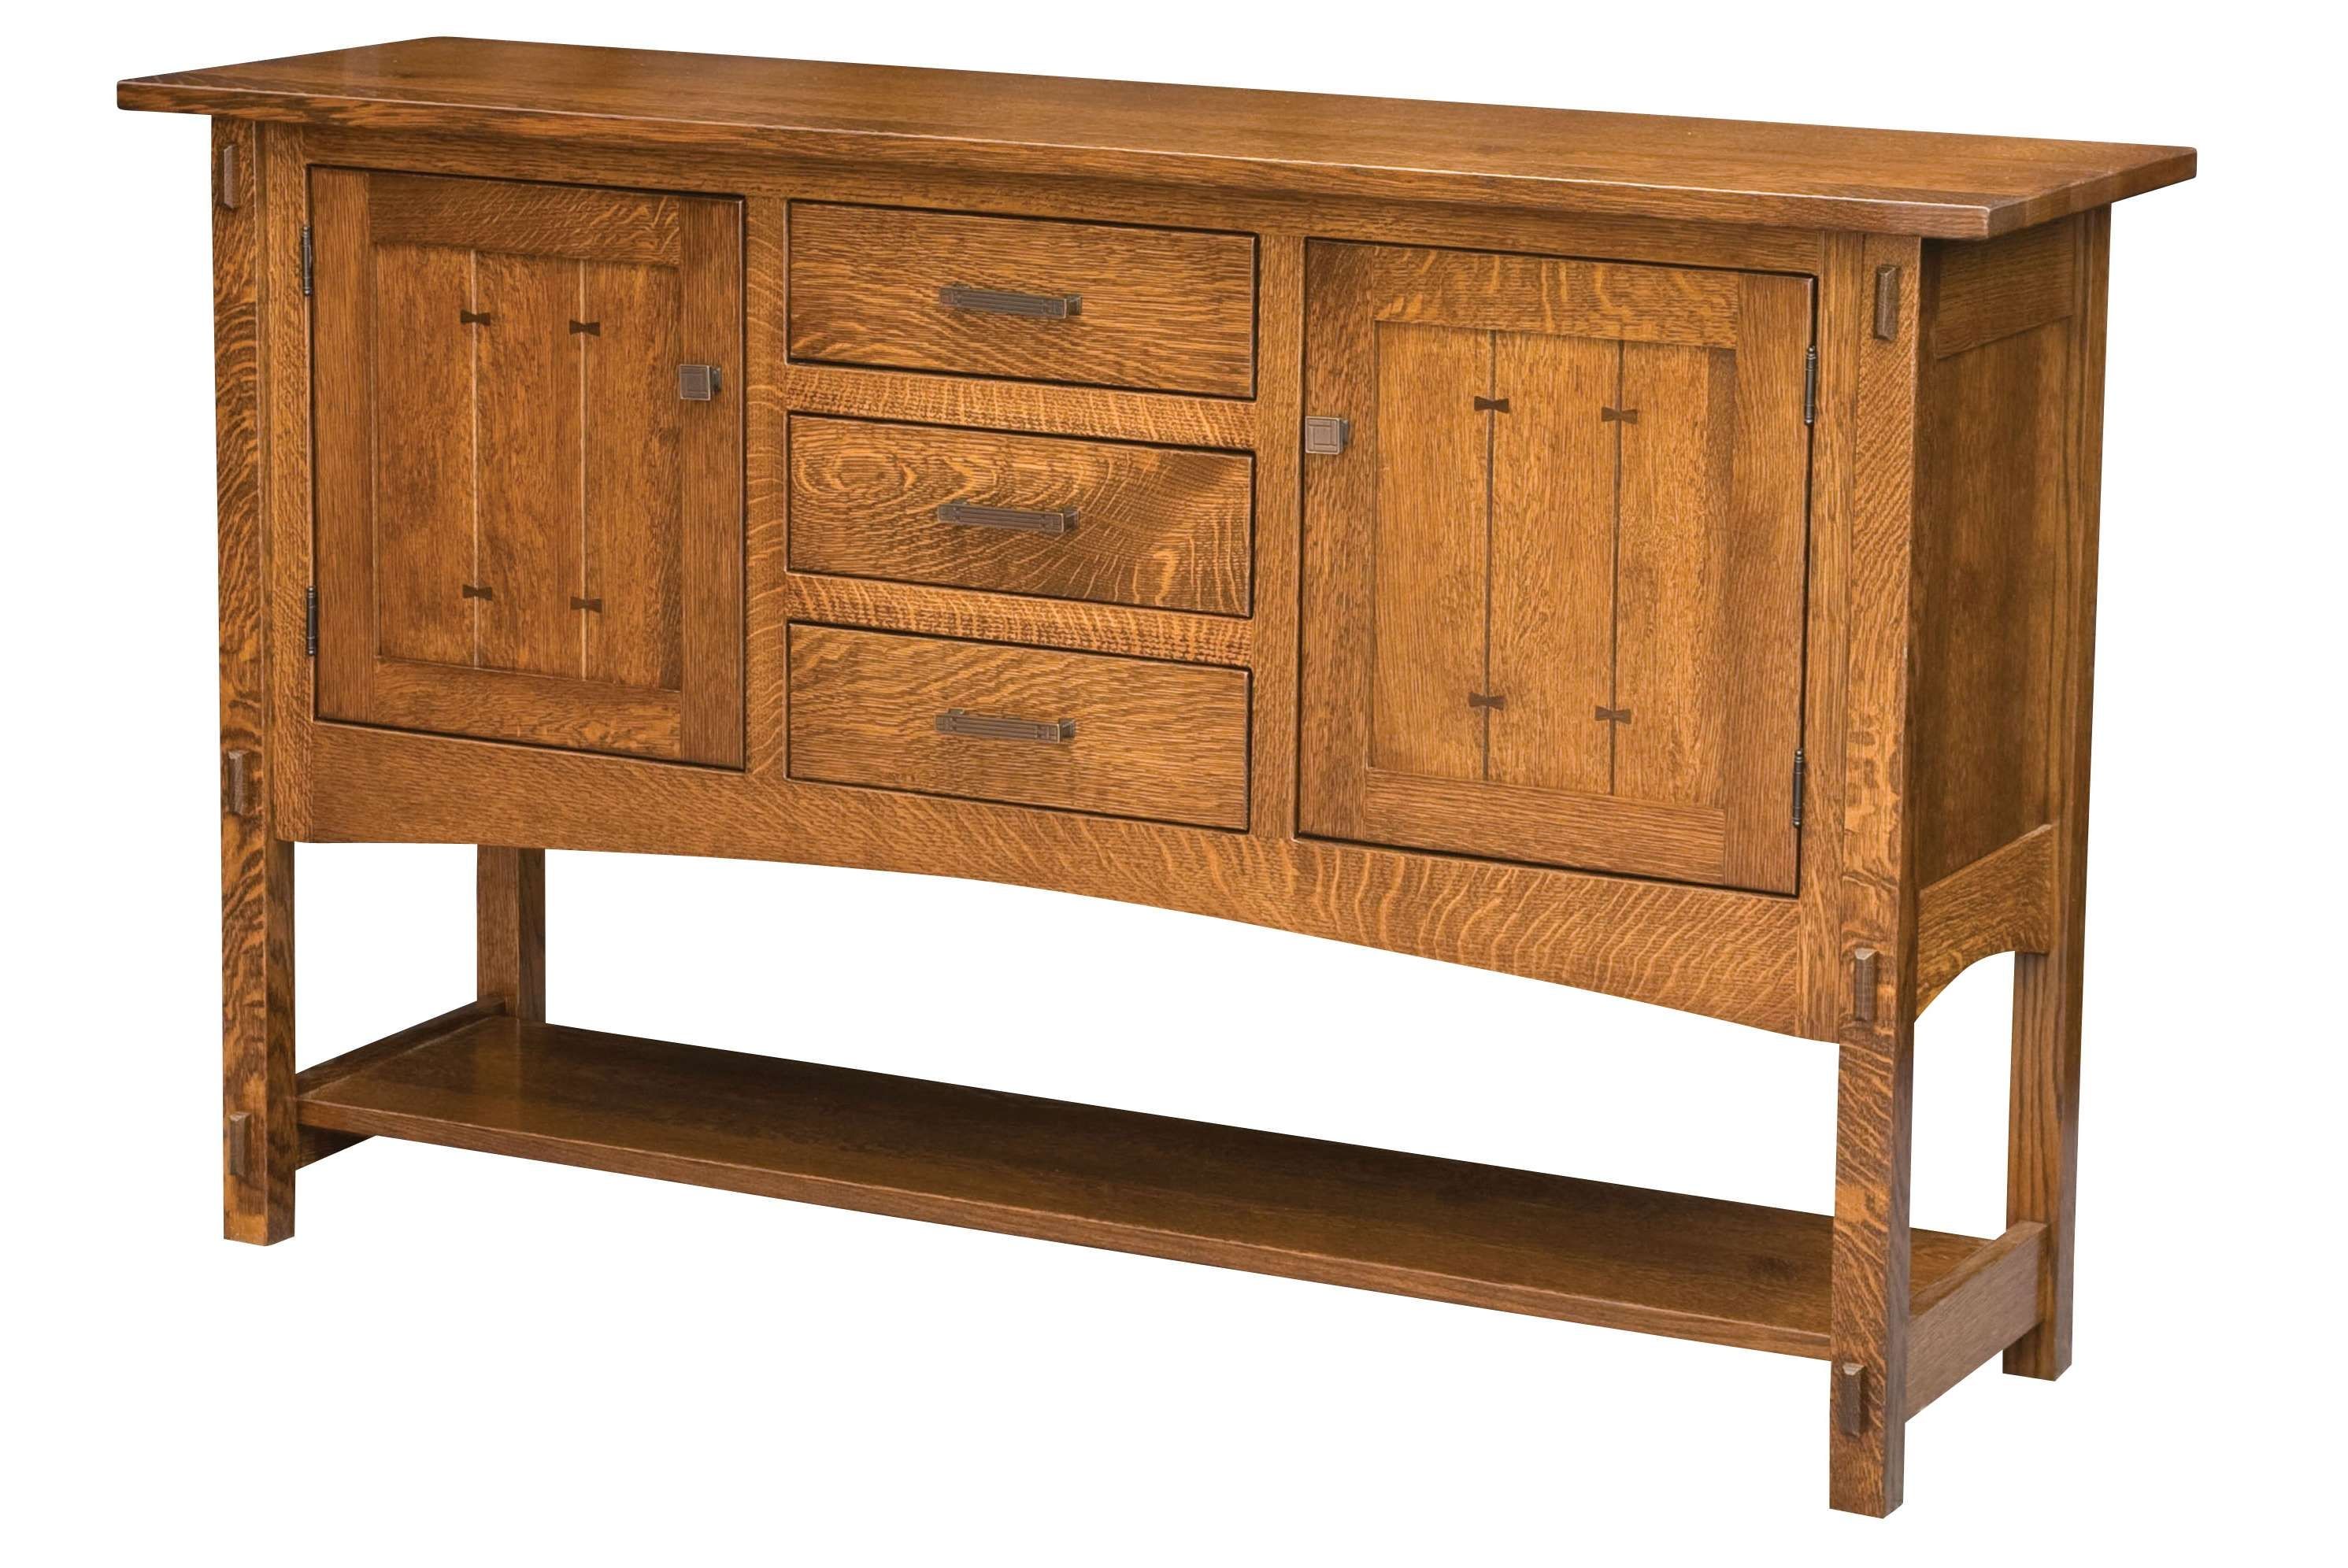 This Sideboard Builtthe Amish For The Mission Works Features Pertaining To Mission Sideboards (View 12 of 20)